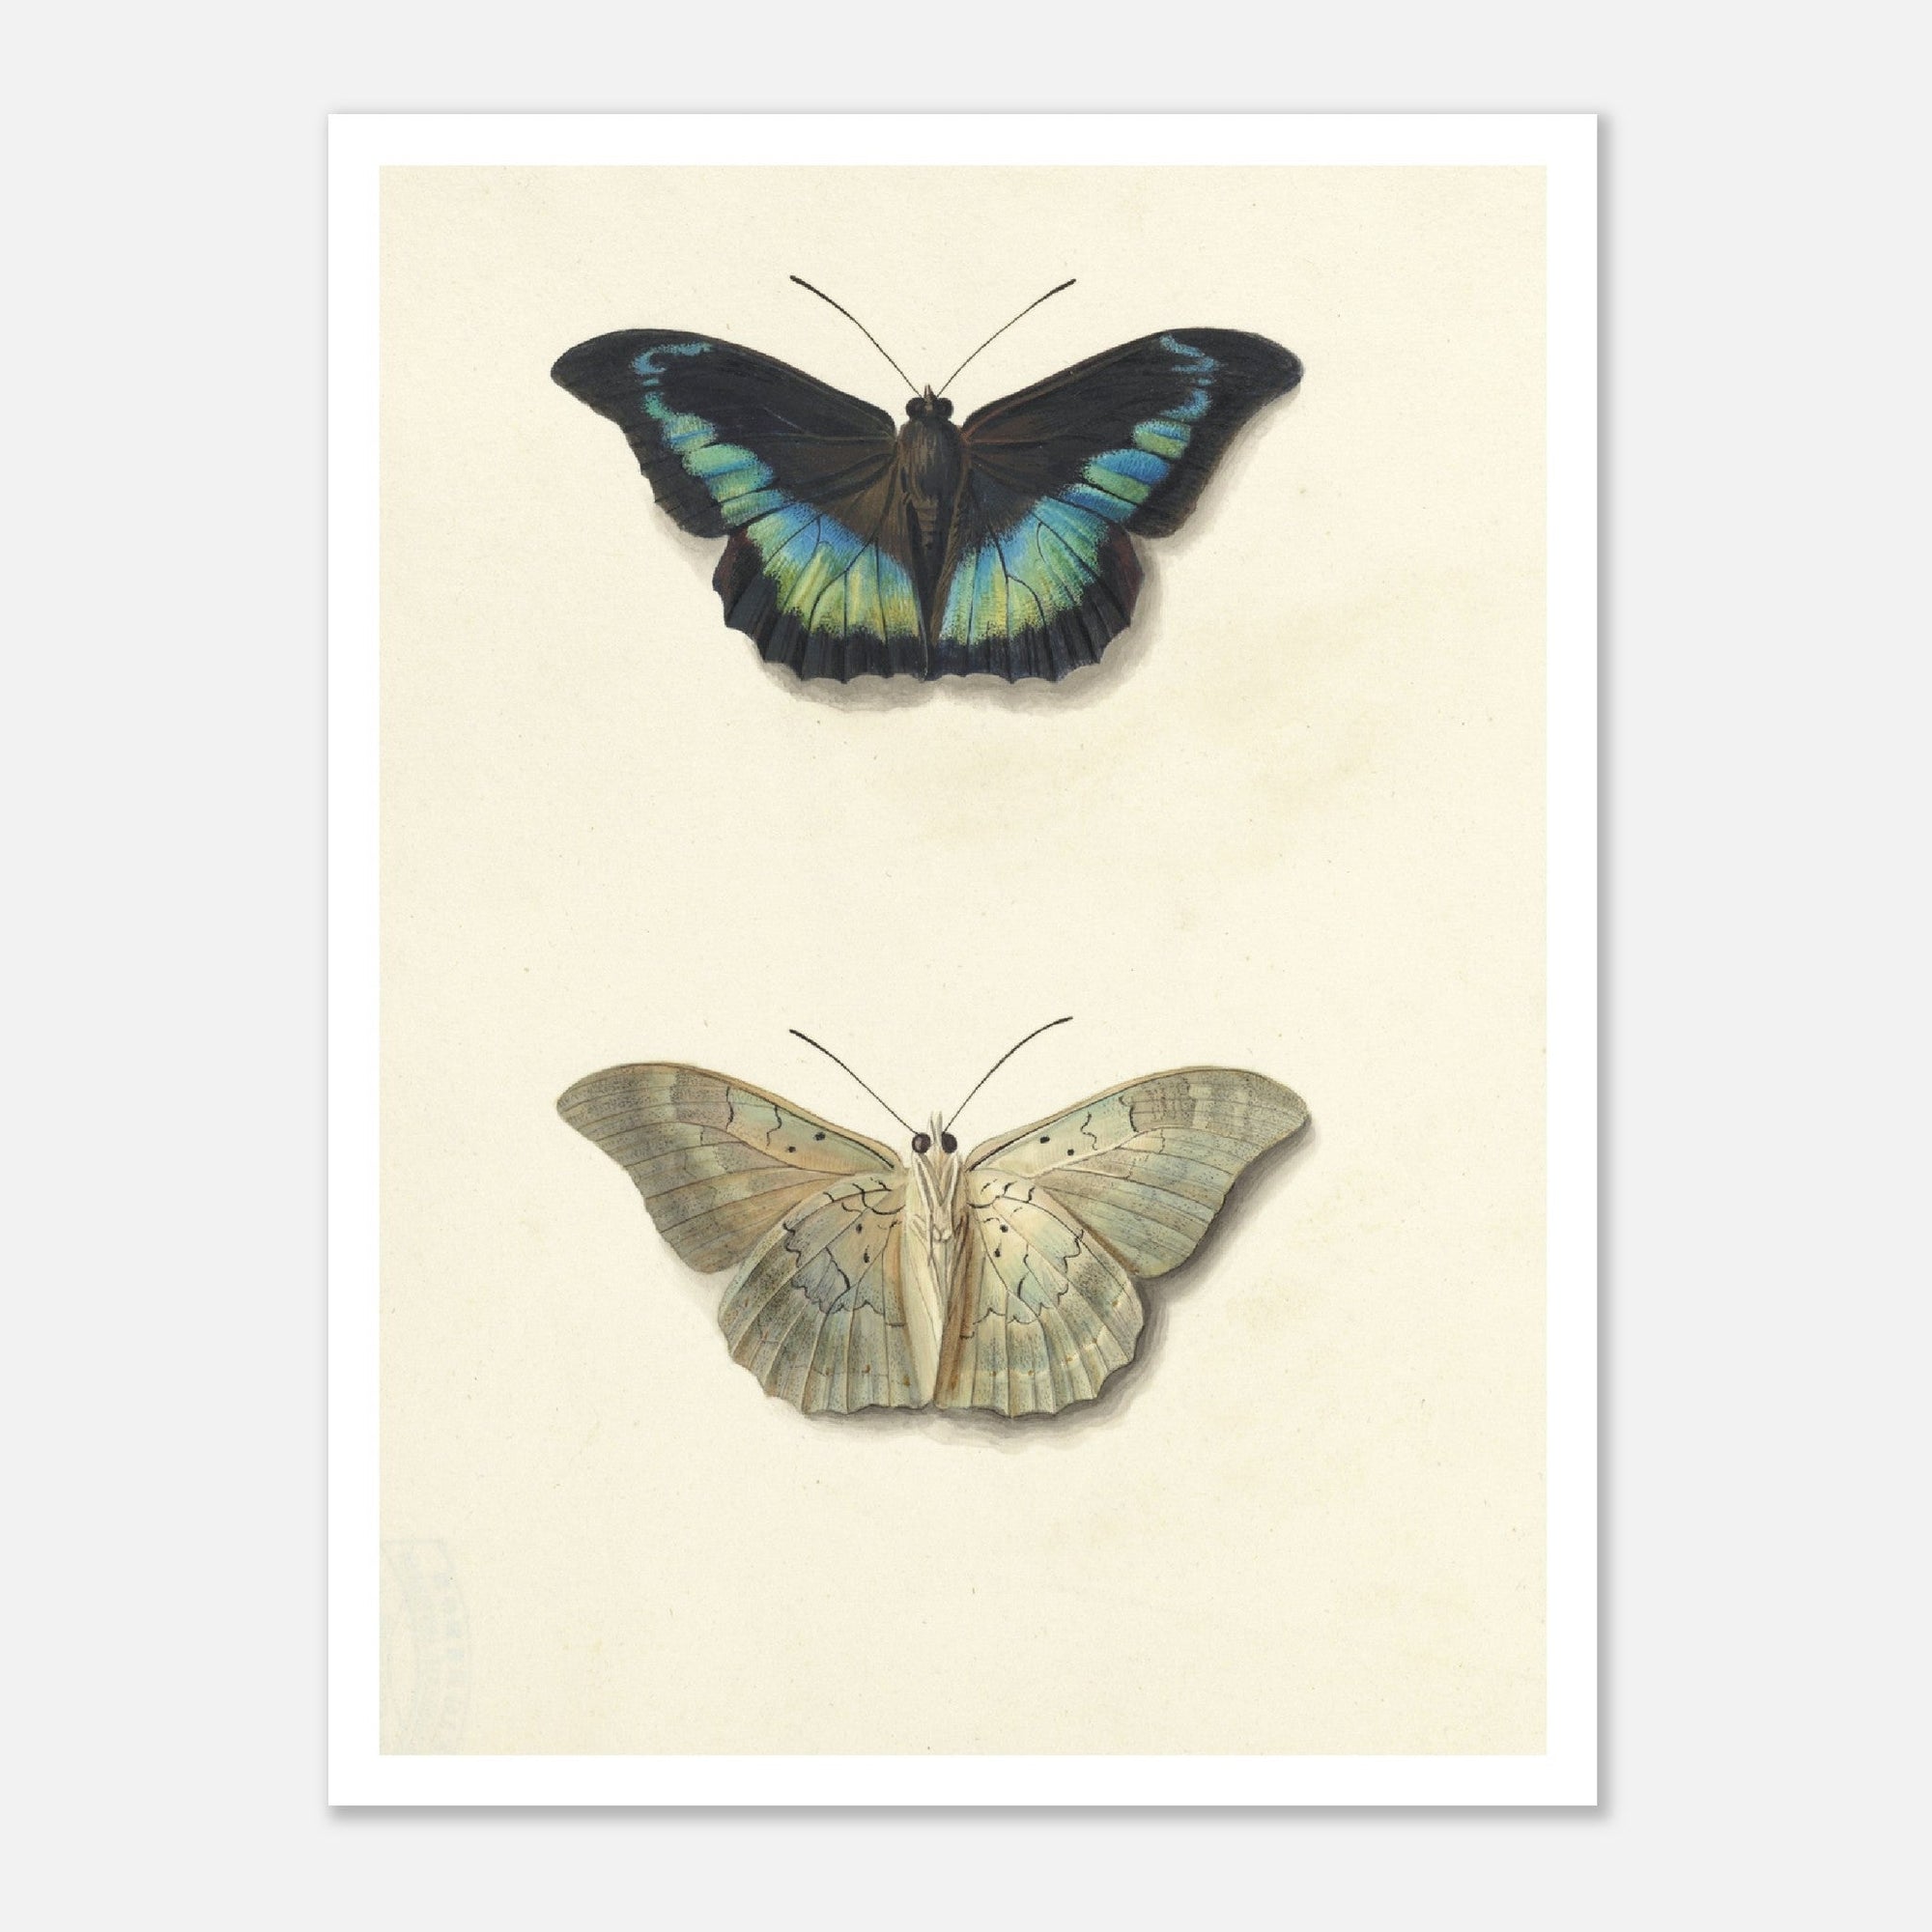 Top and Bottom View of a ButterflyPrint Material